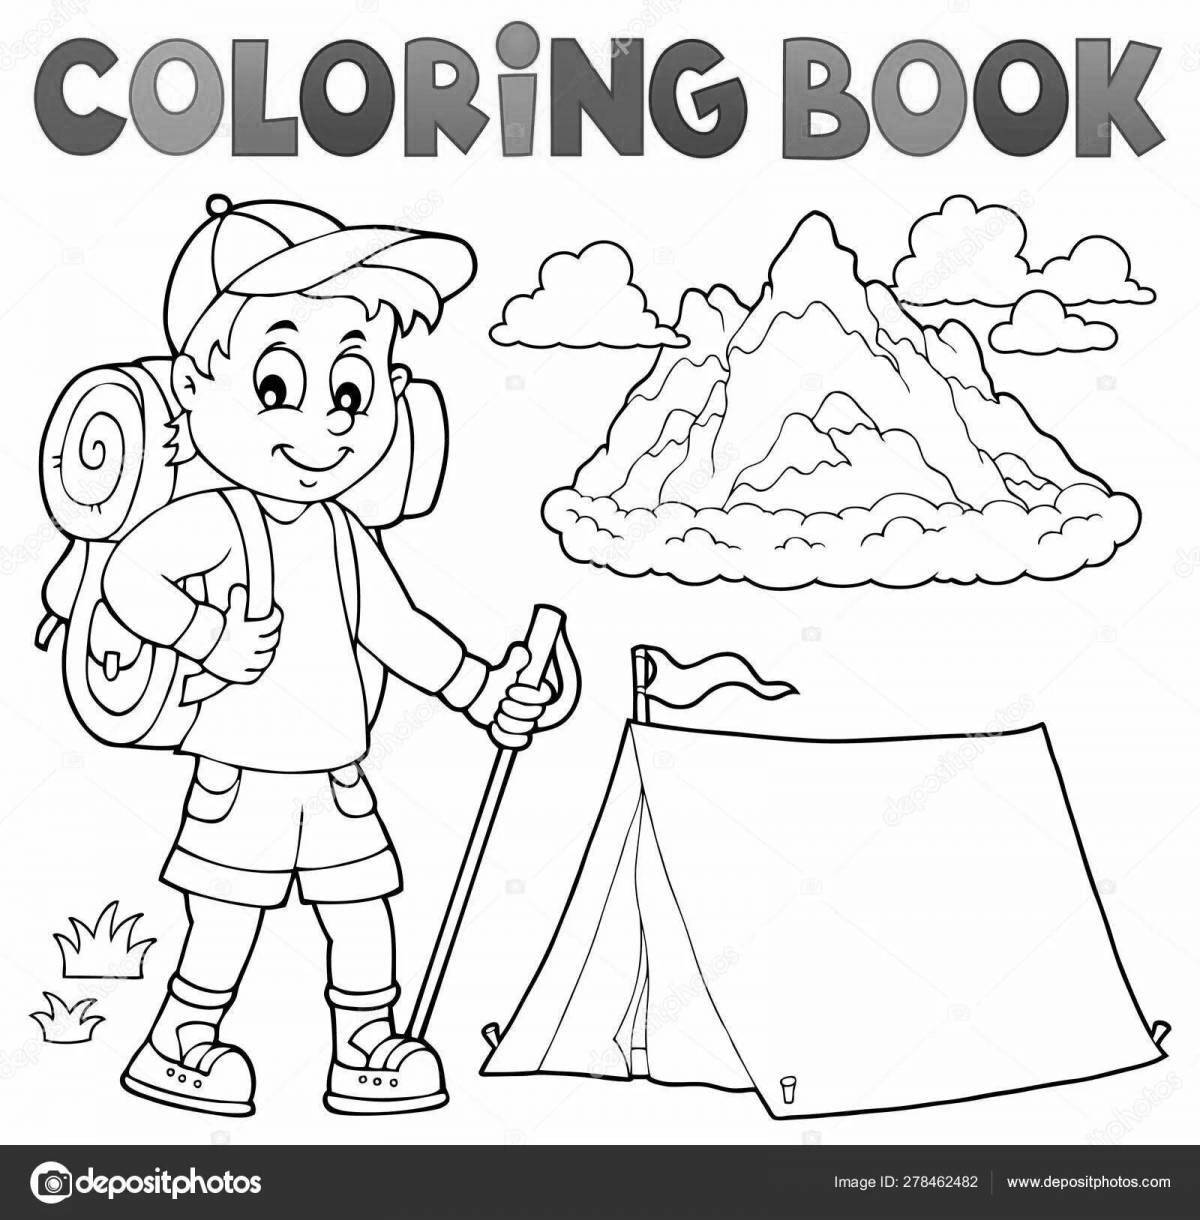 Entertaining travel coloring book